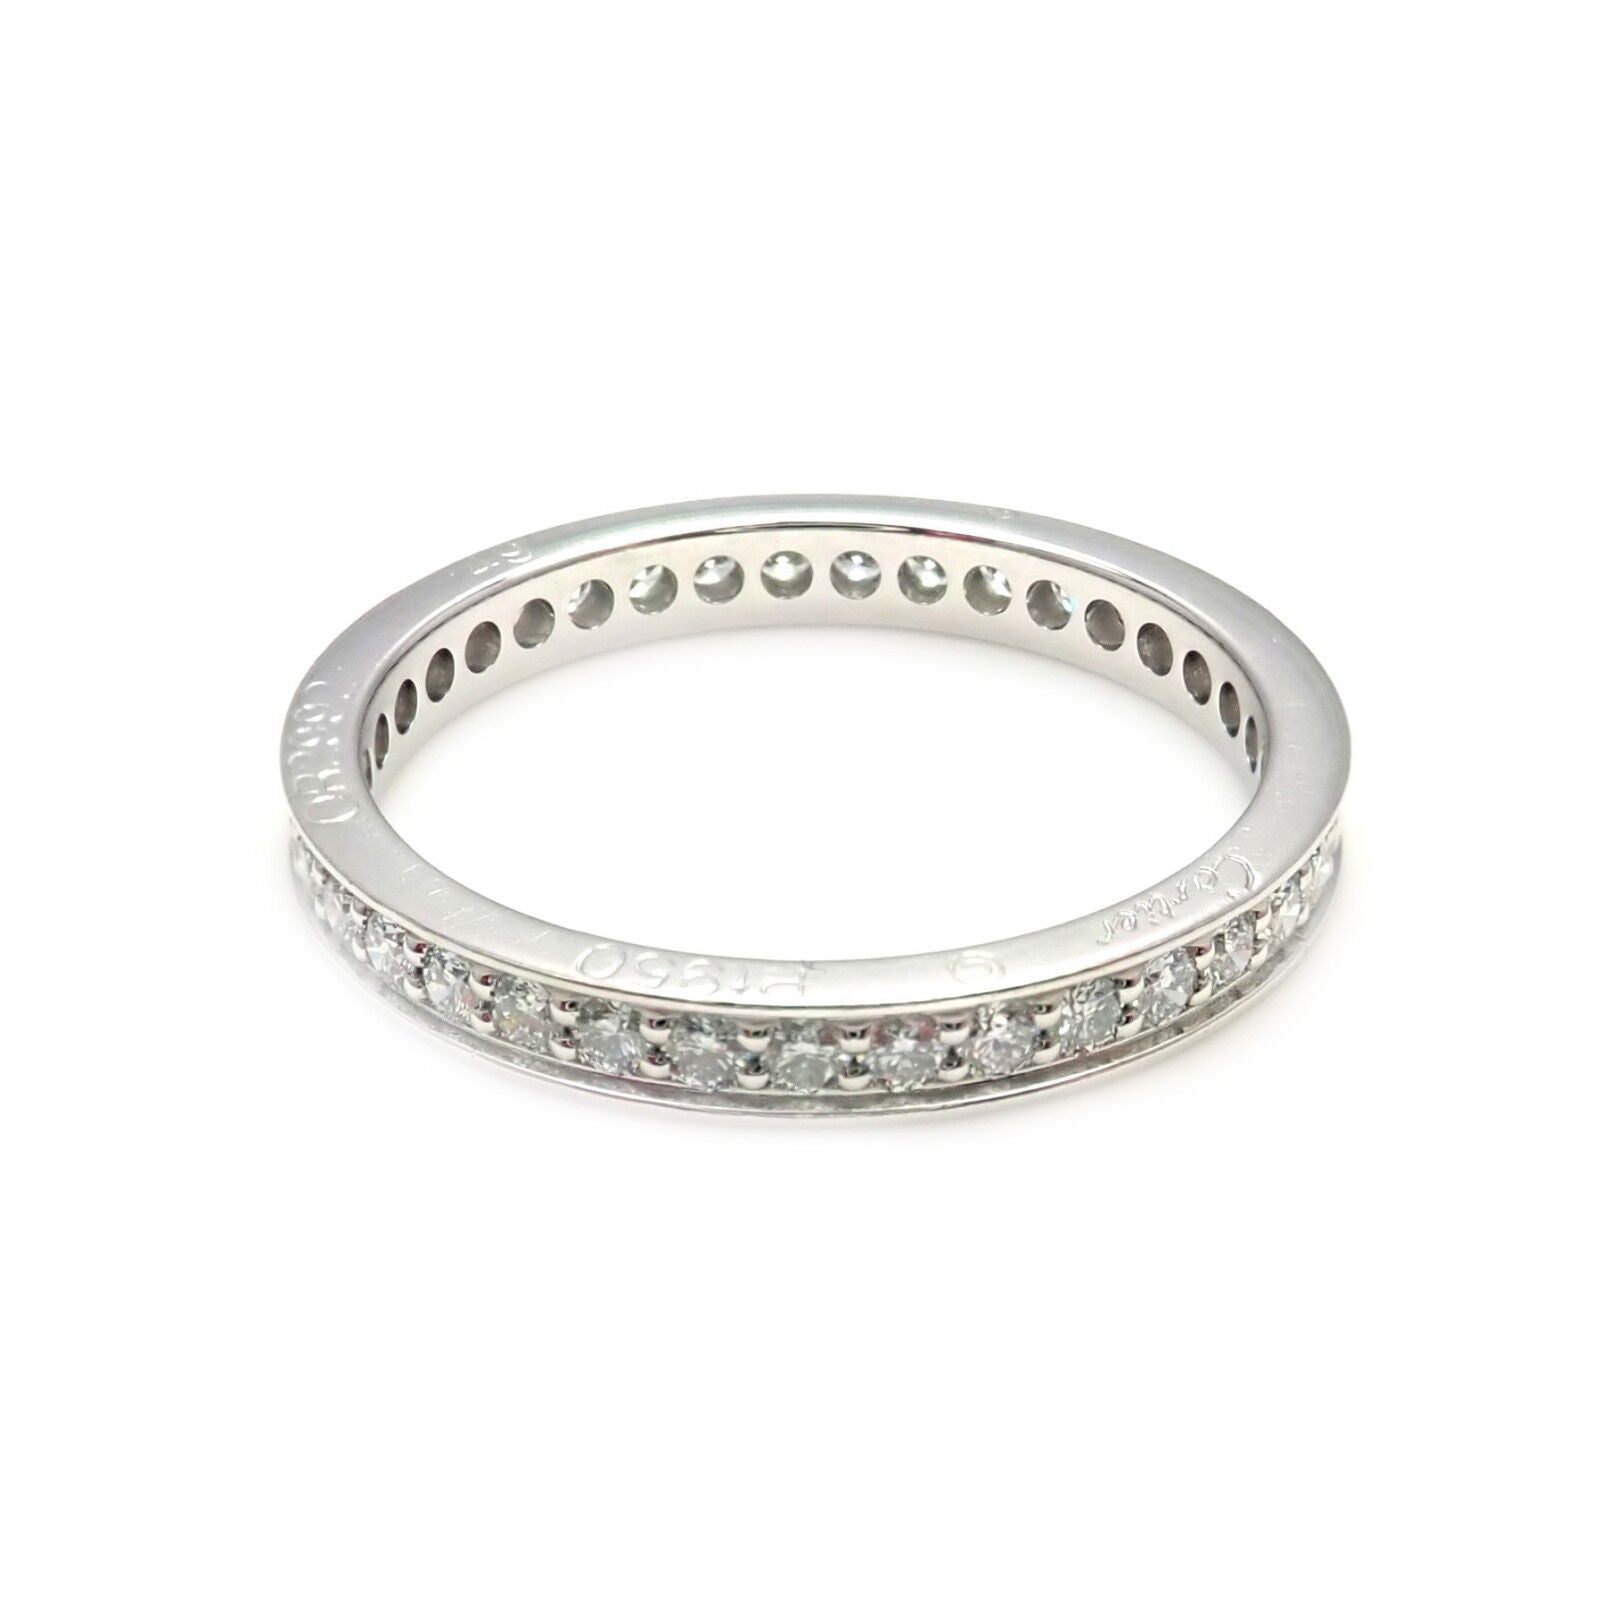 Cartier Jewelry & Watches:Fine Jewelry:Rings Authentic! Cartier Platinum Diamond 0.70ctw Eternity Band Ring Sz EU 49 US 5